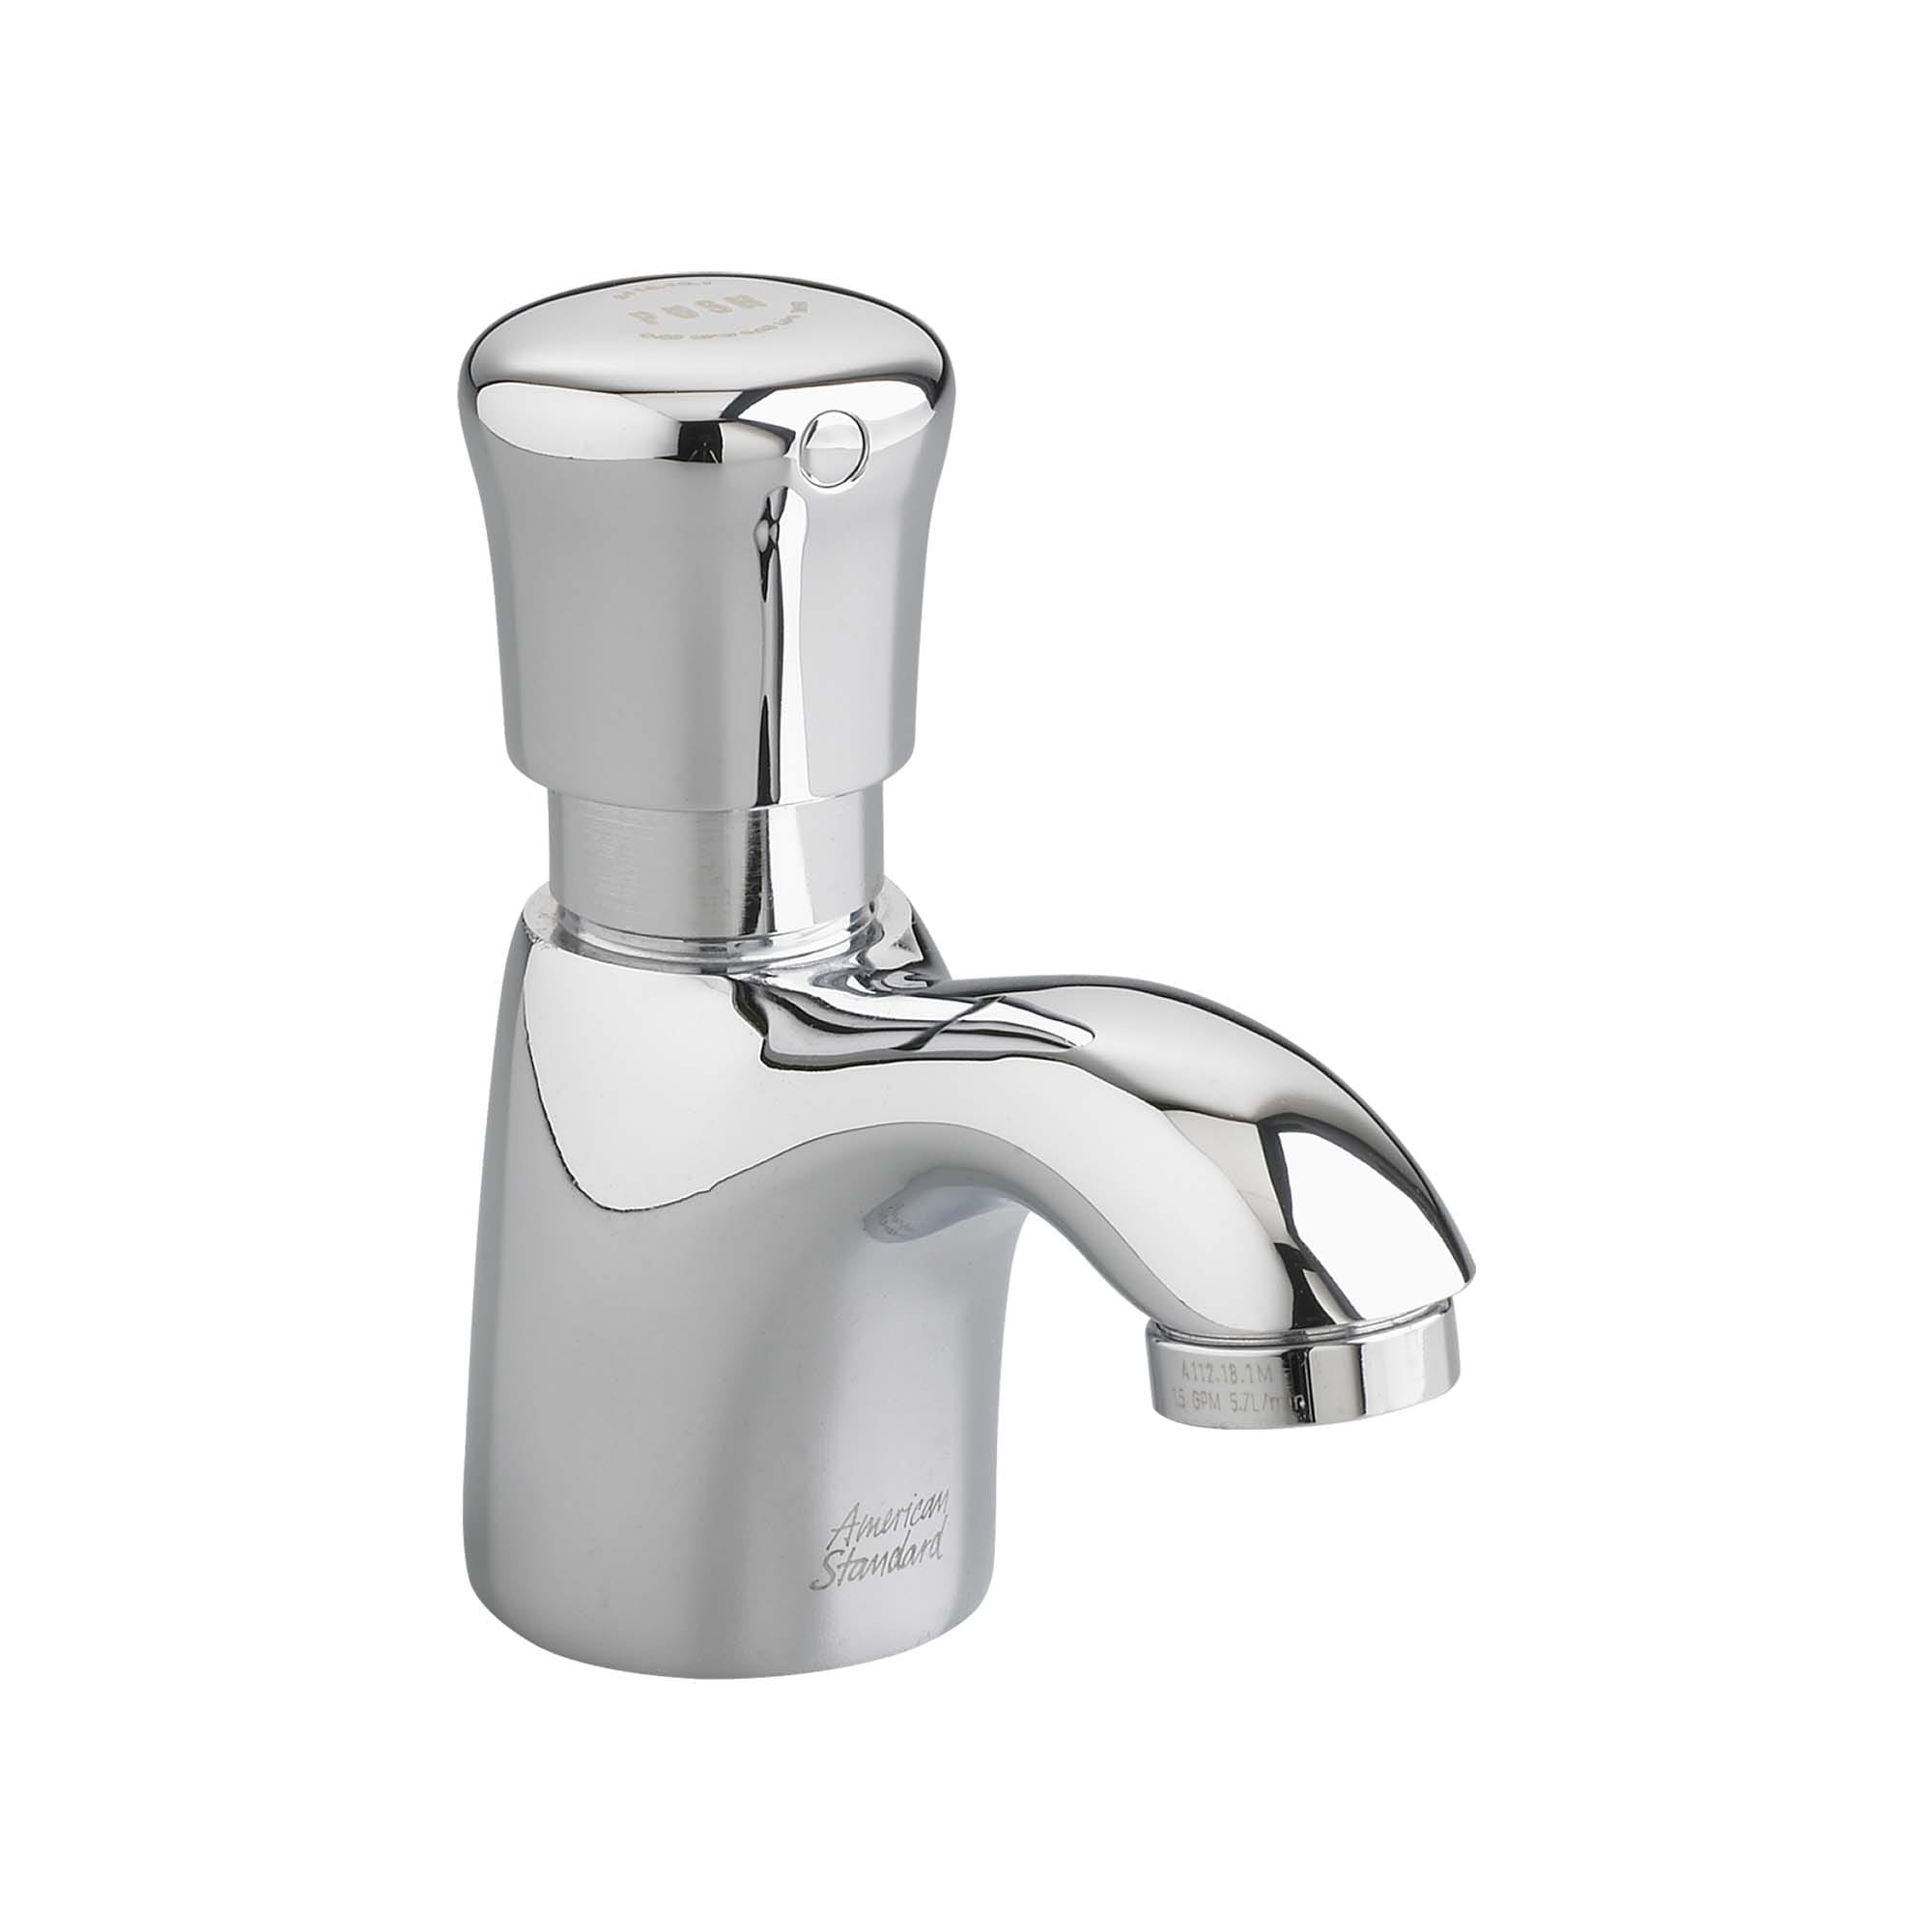 Metering Pillar Tap Faucet With Extended Spout 1.0 gpm/3.8 Lpf With Mechanical Mixing Valve